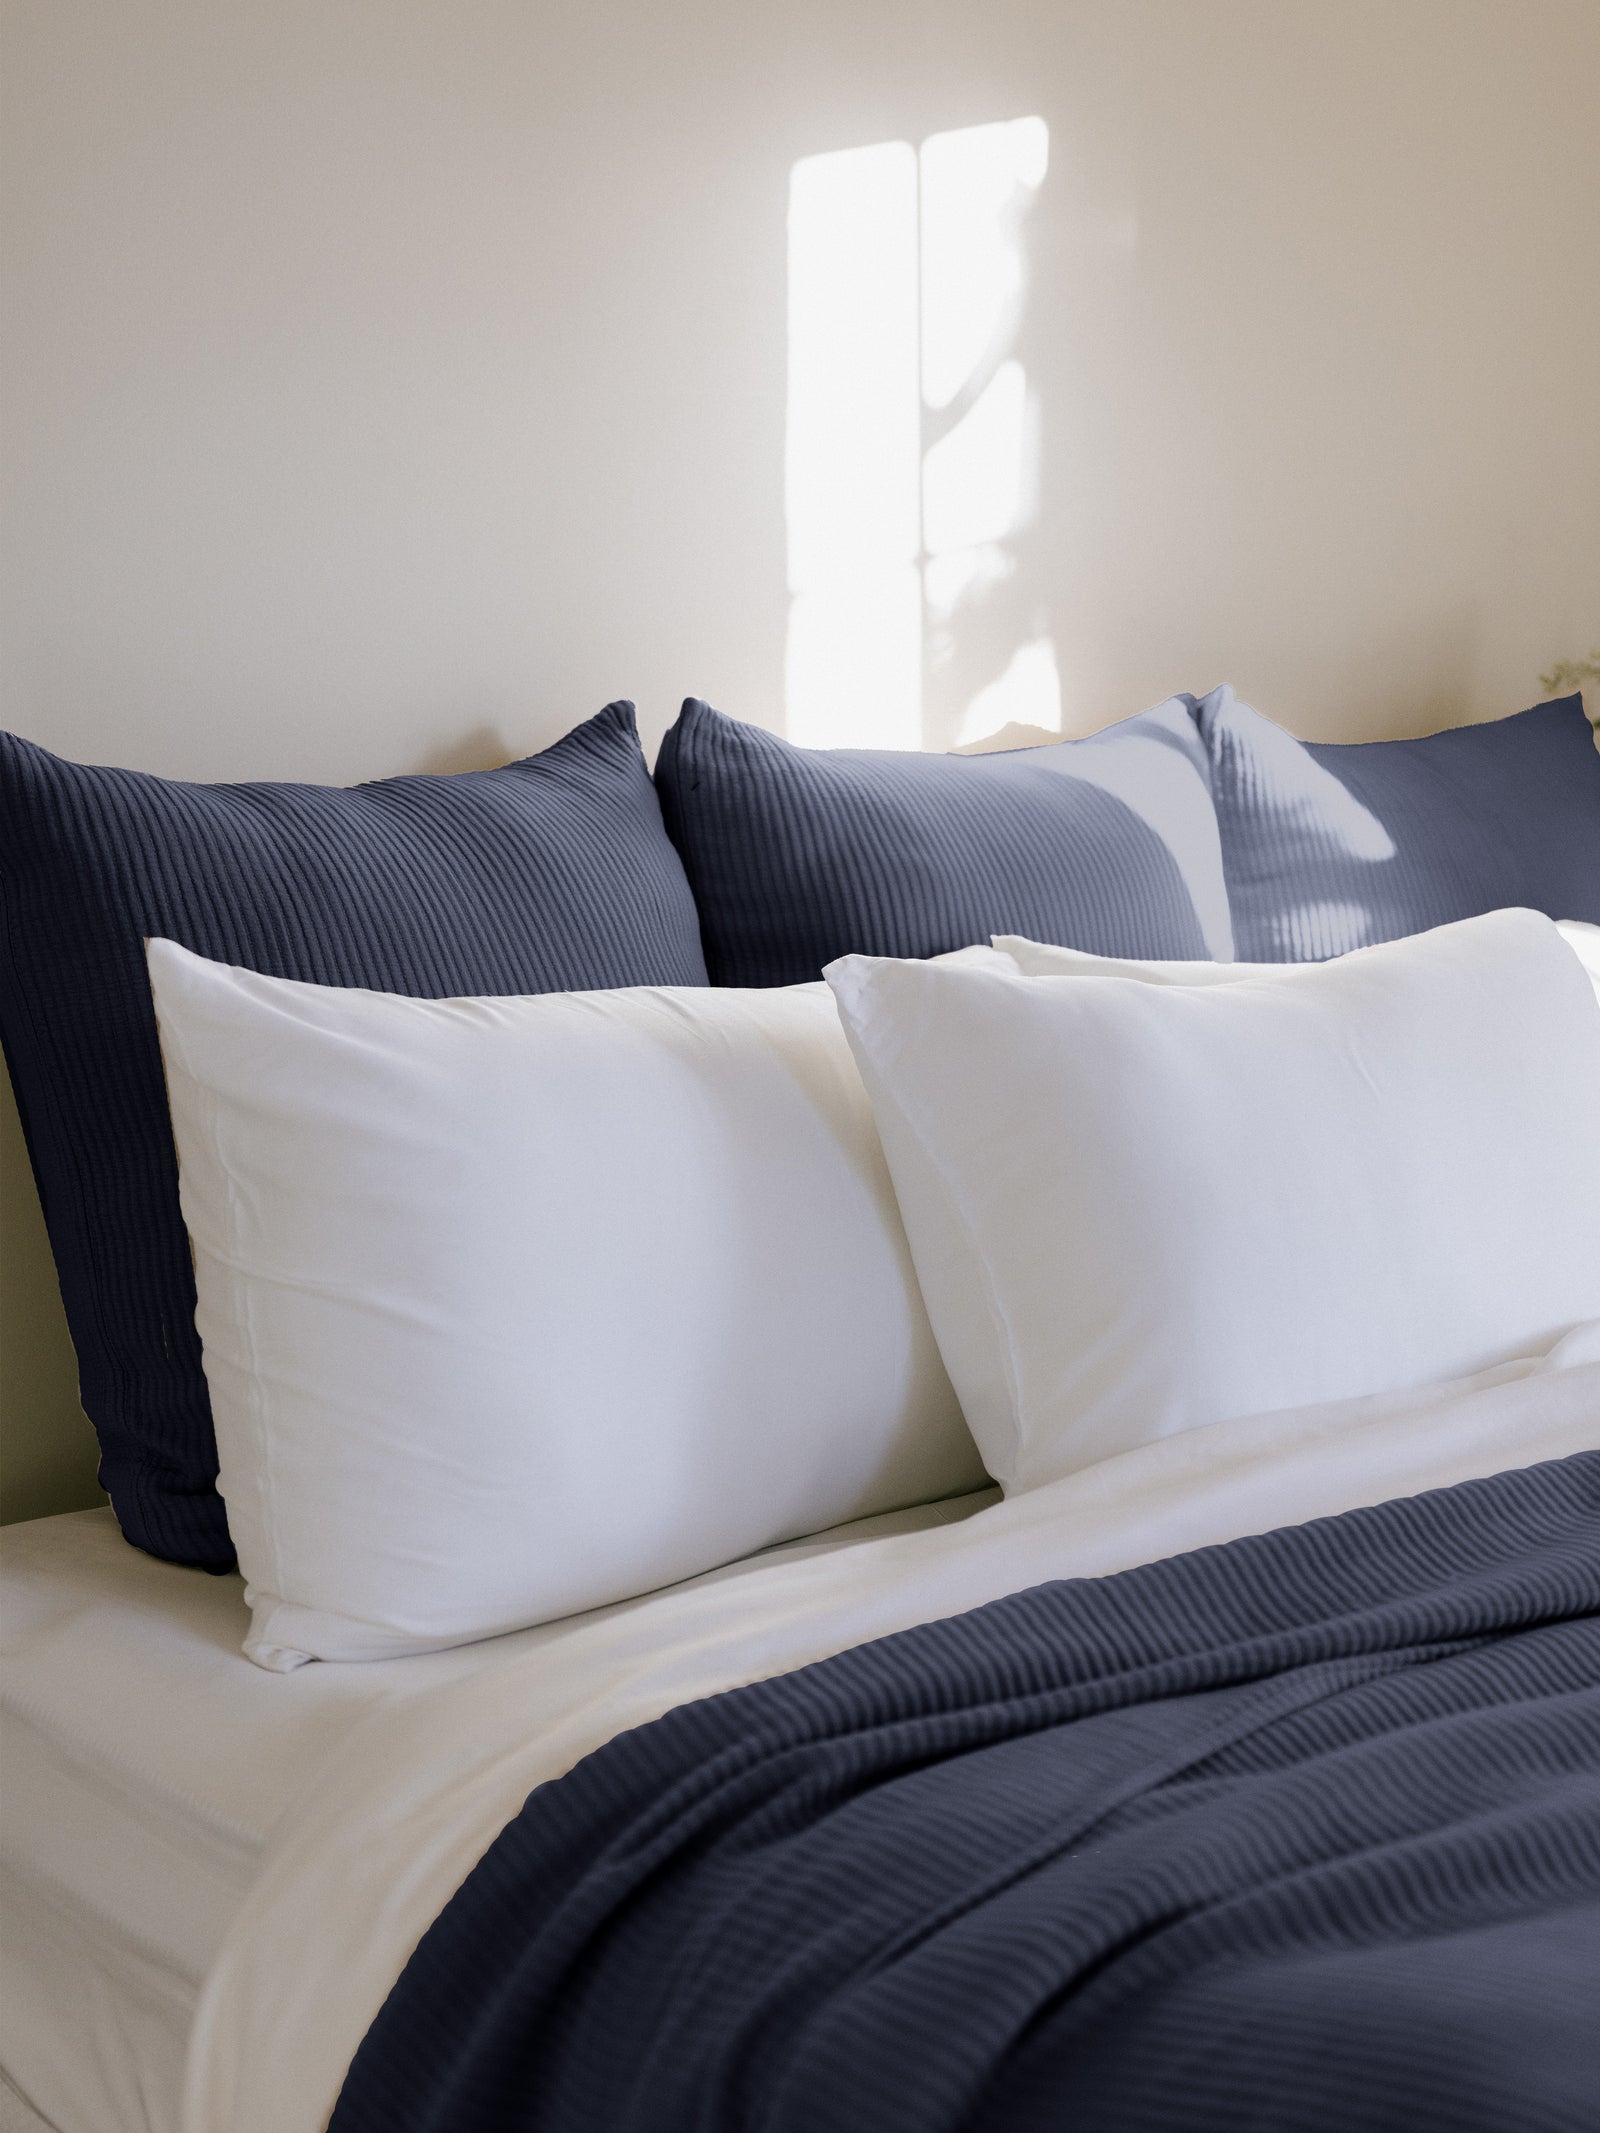 Navy euro coverlet shams behind white pillows on bed 